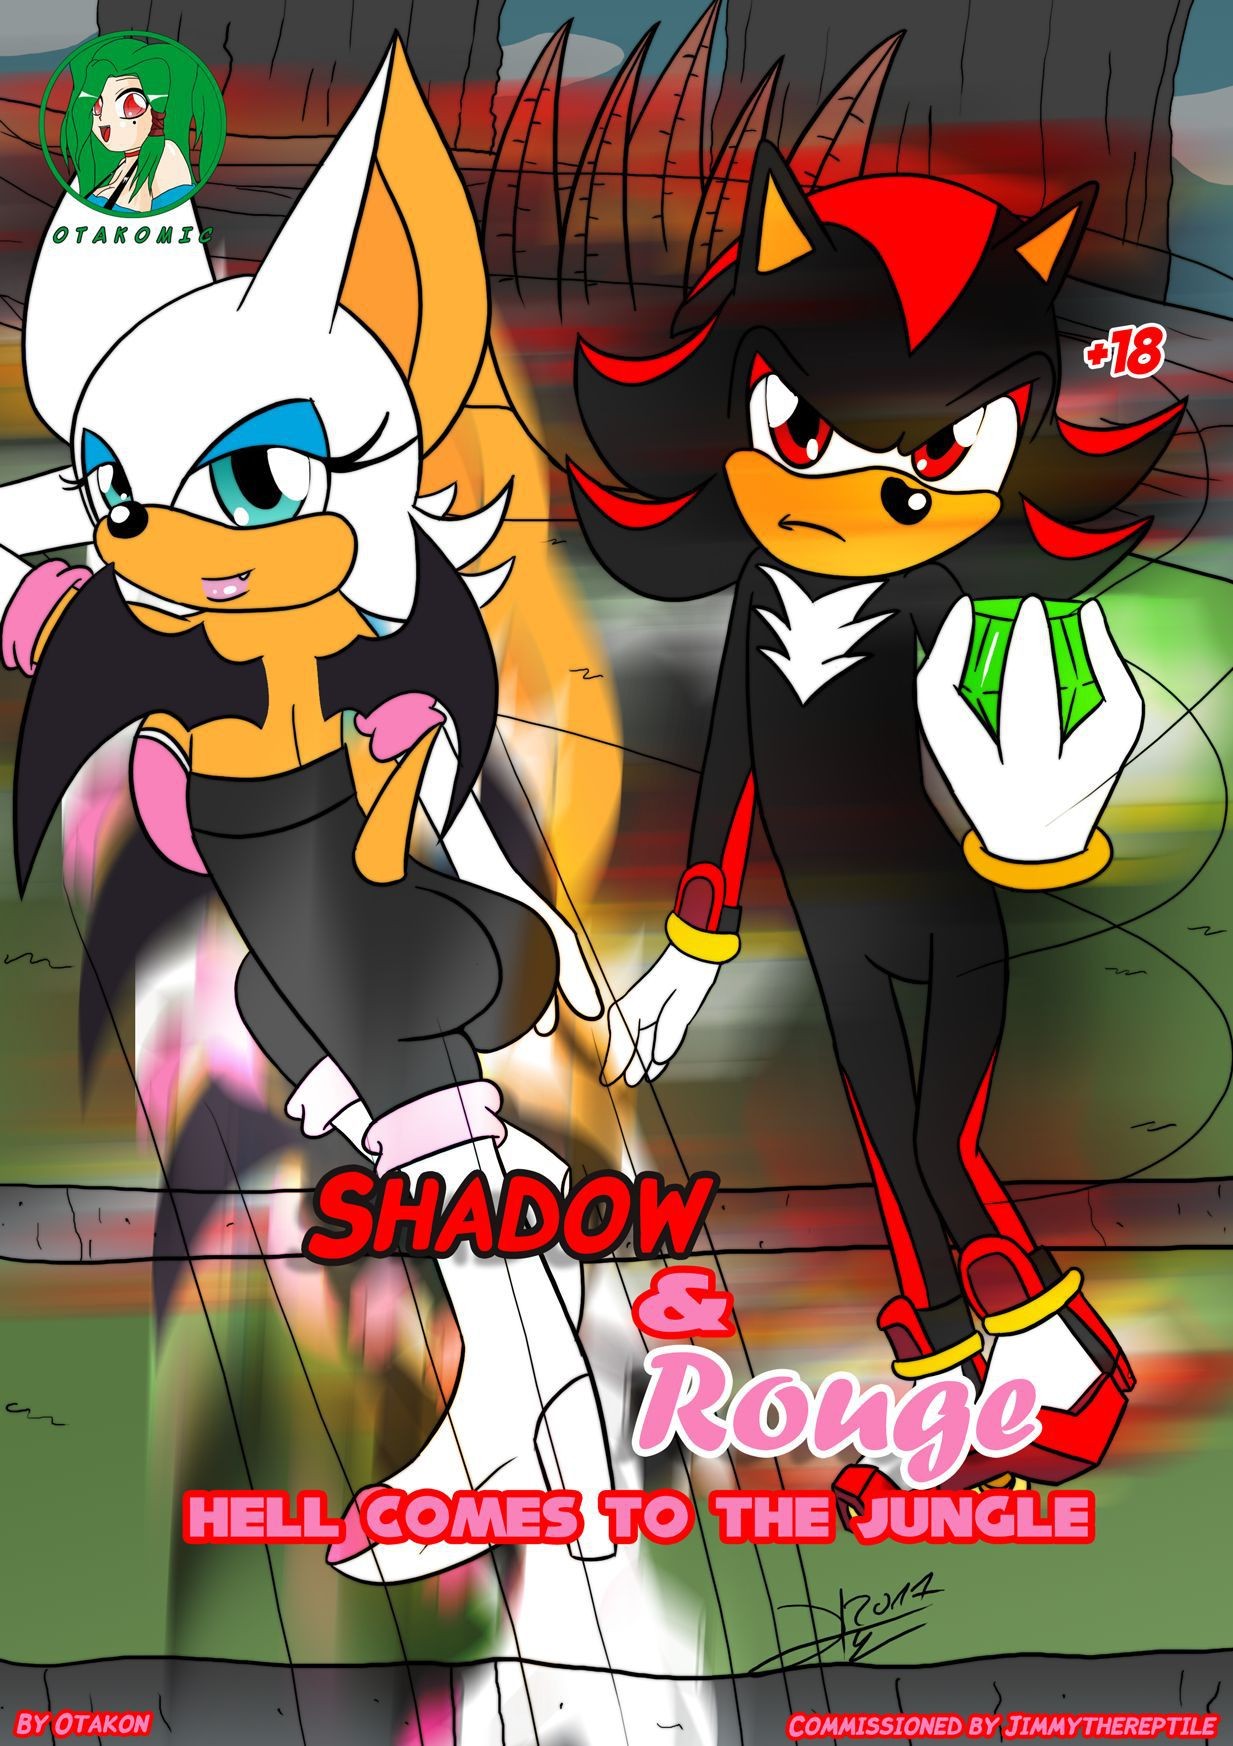 Hardfuck [Otakon] Shadow & Rouge - Hell Comes To The Jungle [Ongoing] Flashing